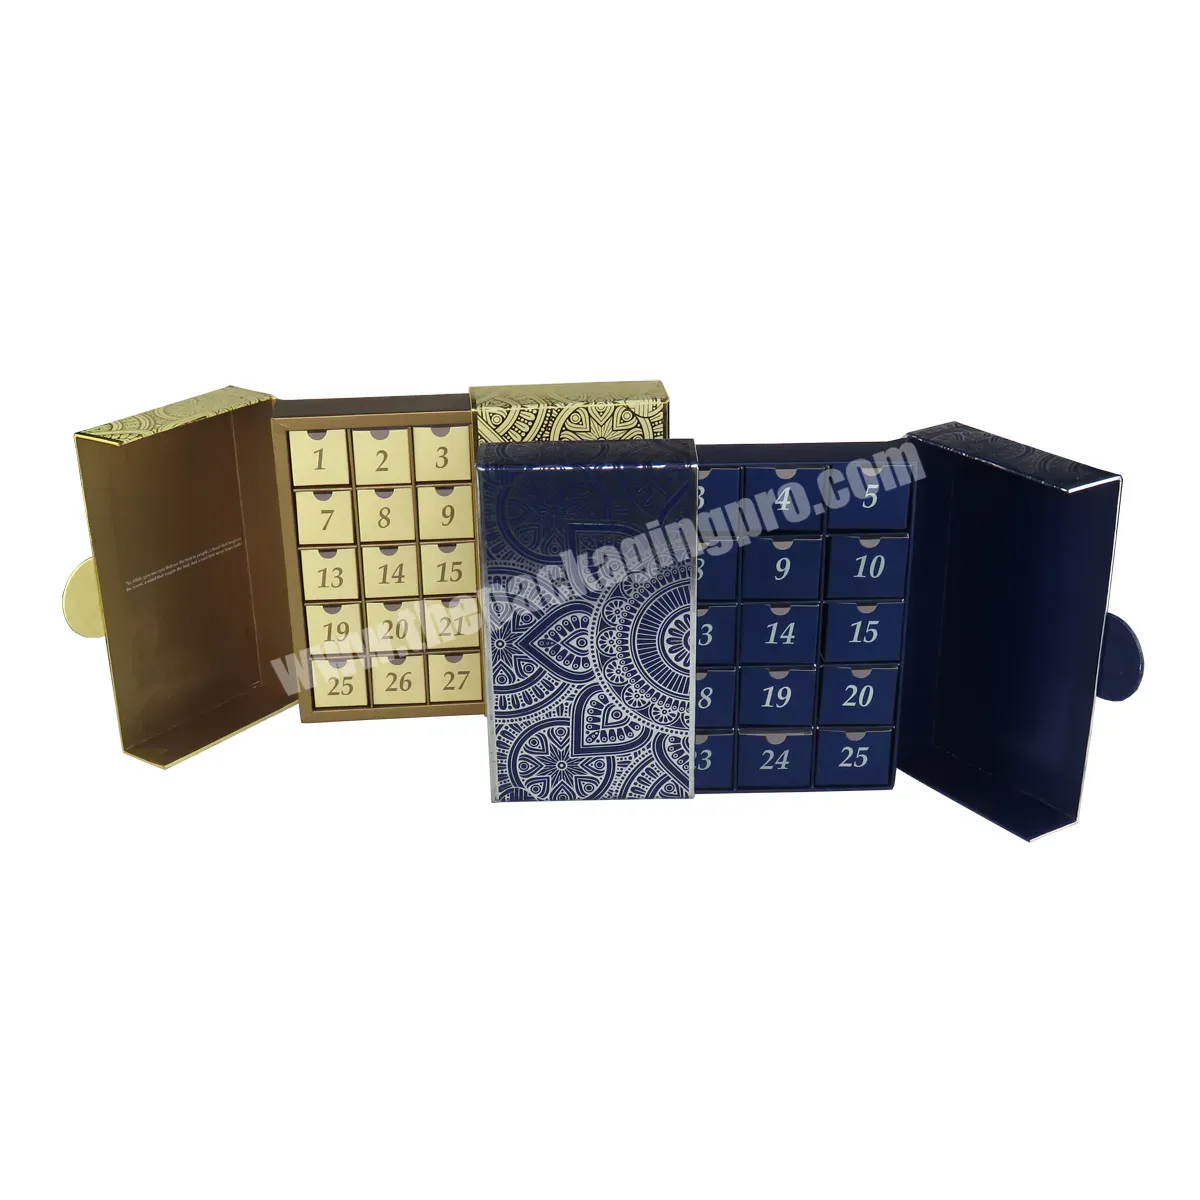 Innovative Calendar Rigid Luxury Cardboard Boxes Keep Your Business Organized And On Track - Buy Rigid Luxury,Calendar Box,Organized And On Track.